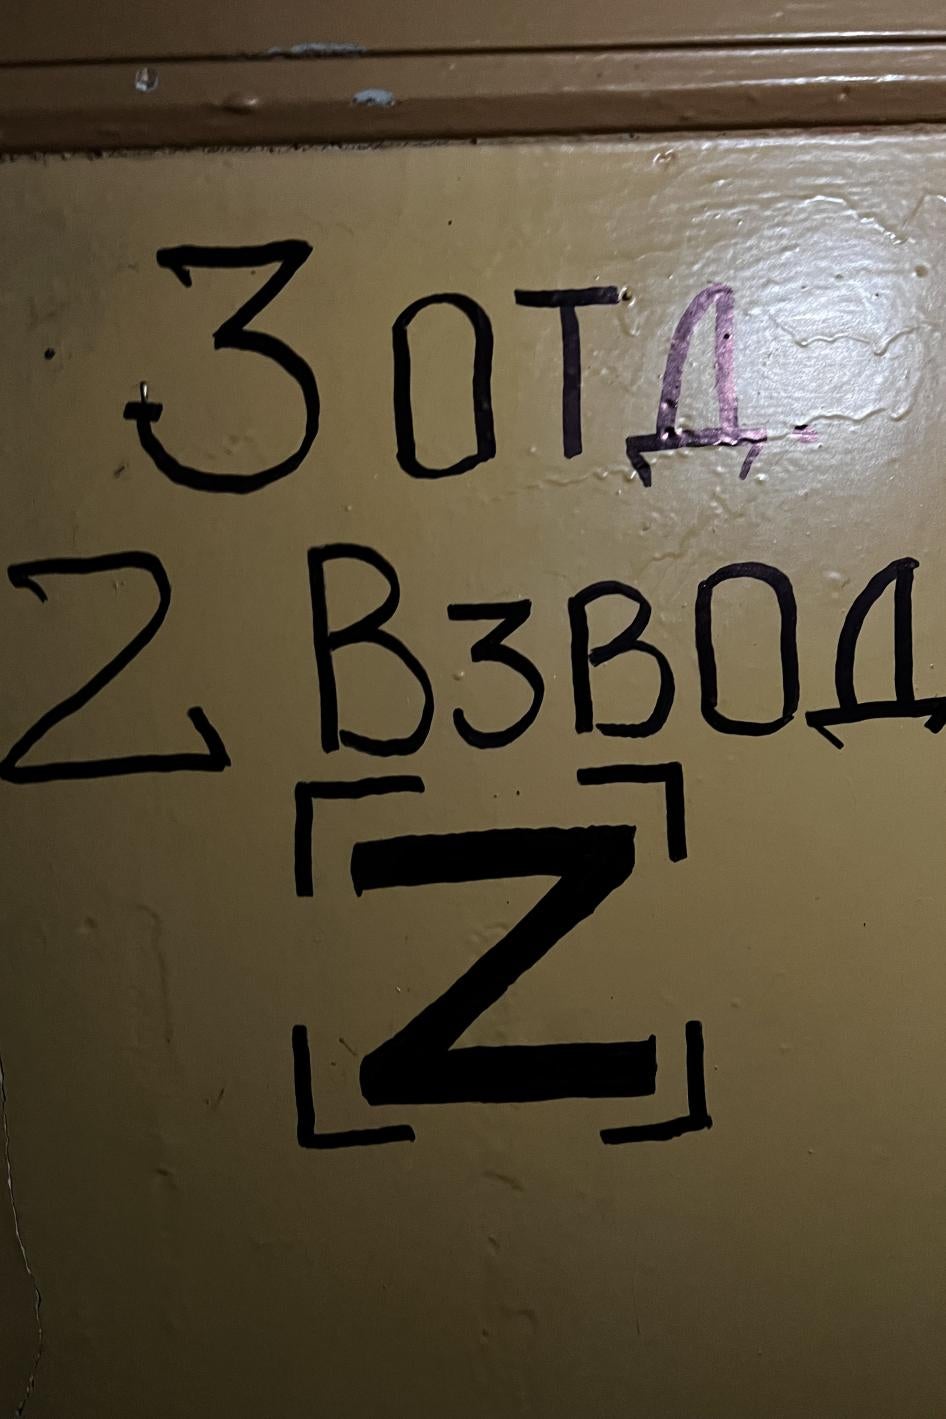 3rd squad, 2nd platoon was written above a large Z on a door in Izium’s Cultural Center, which Russian forces occupied as a base. The Cultural Center is next door to the City Railway Polyclinic, where forces held and tortured people, September 27, 2022.